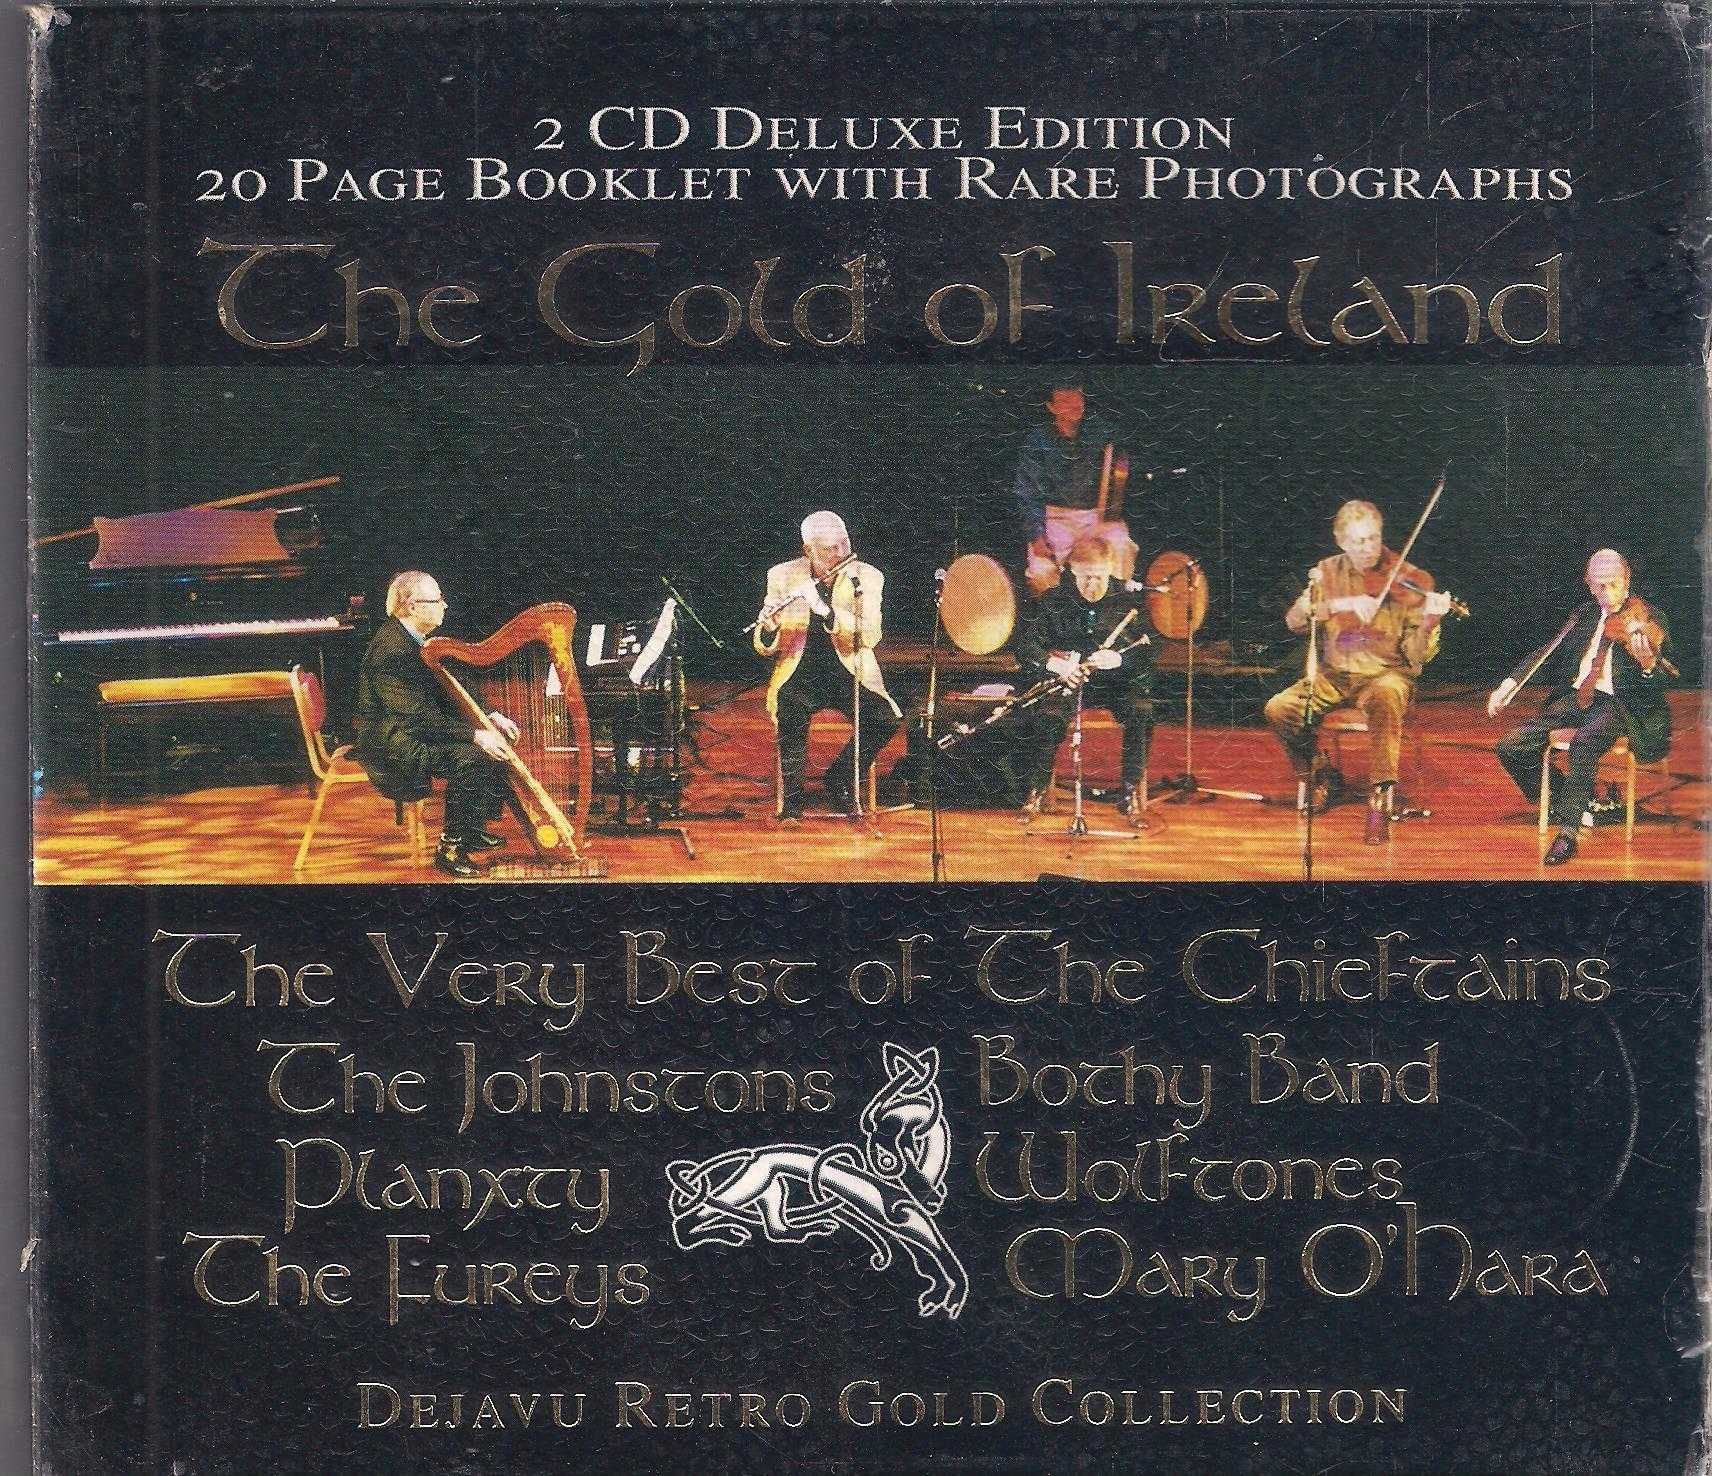 The Gold Of Ireland 2CD Deluxe Edition